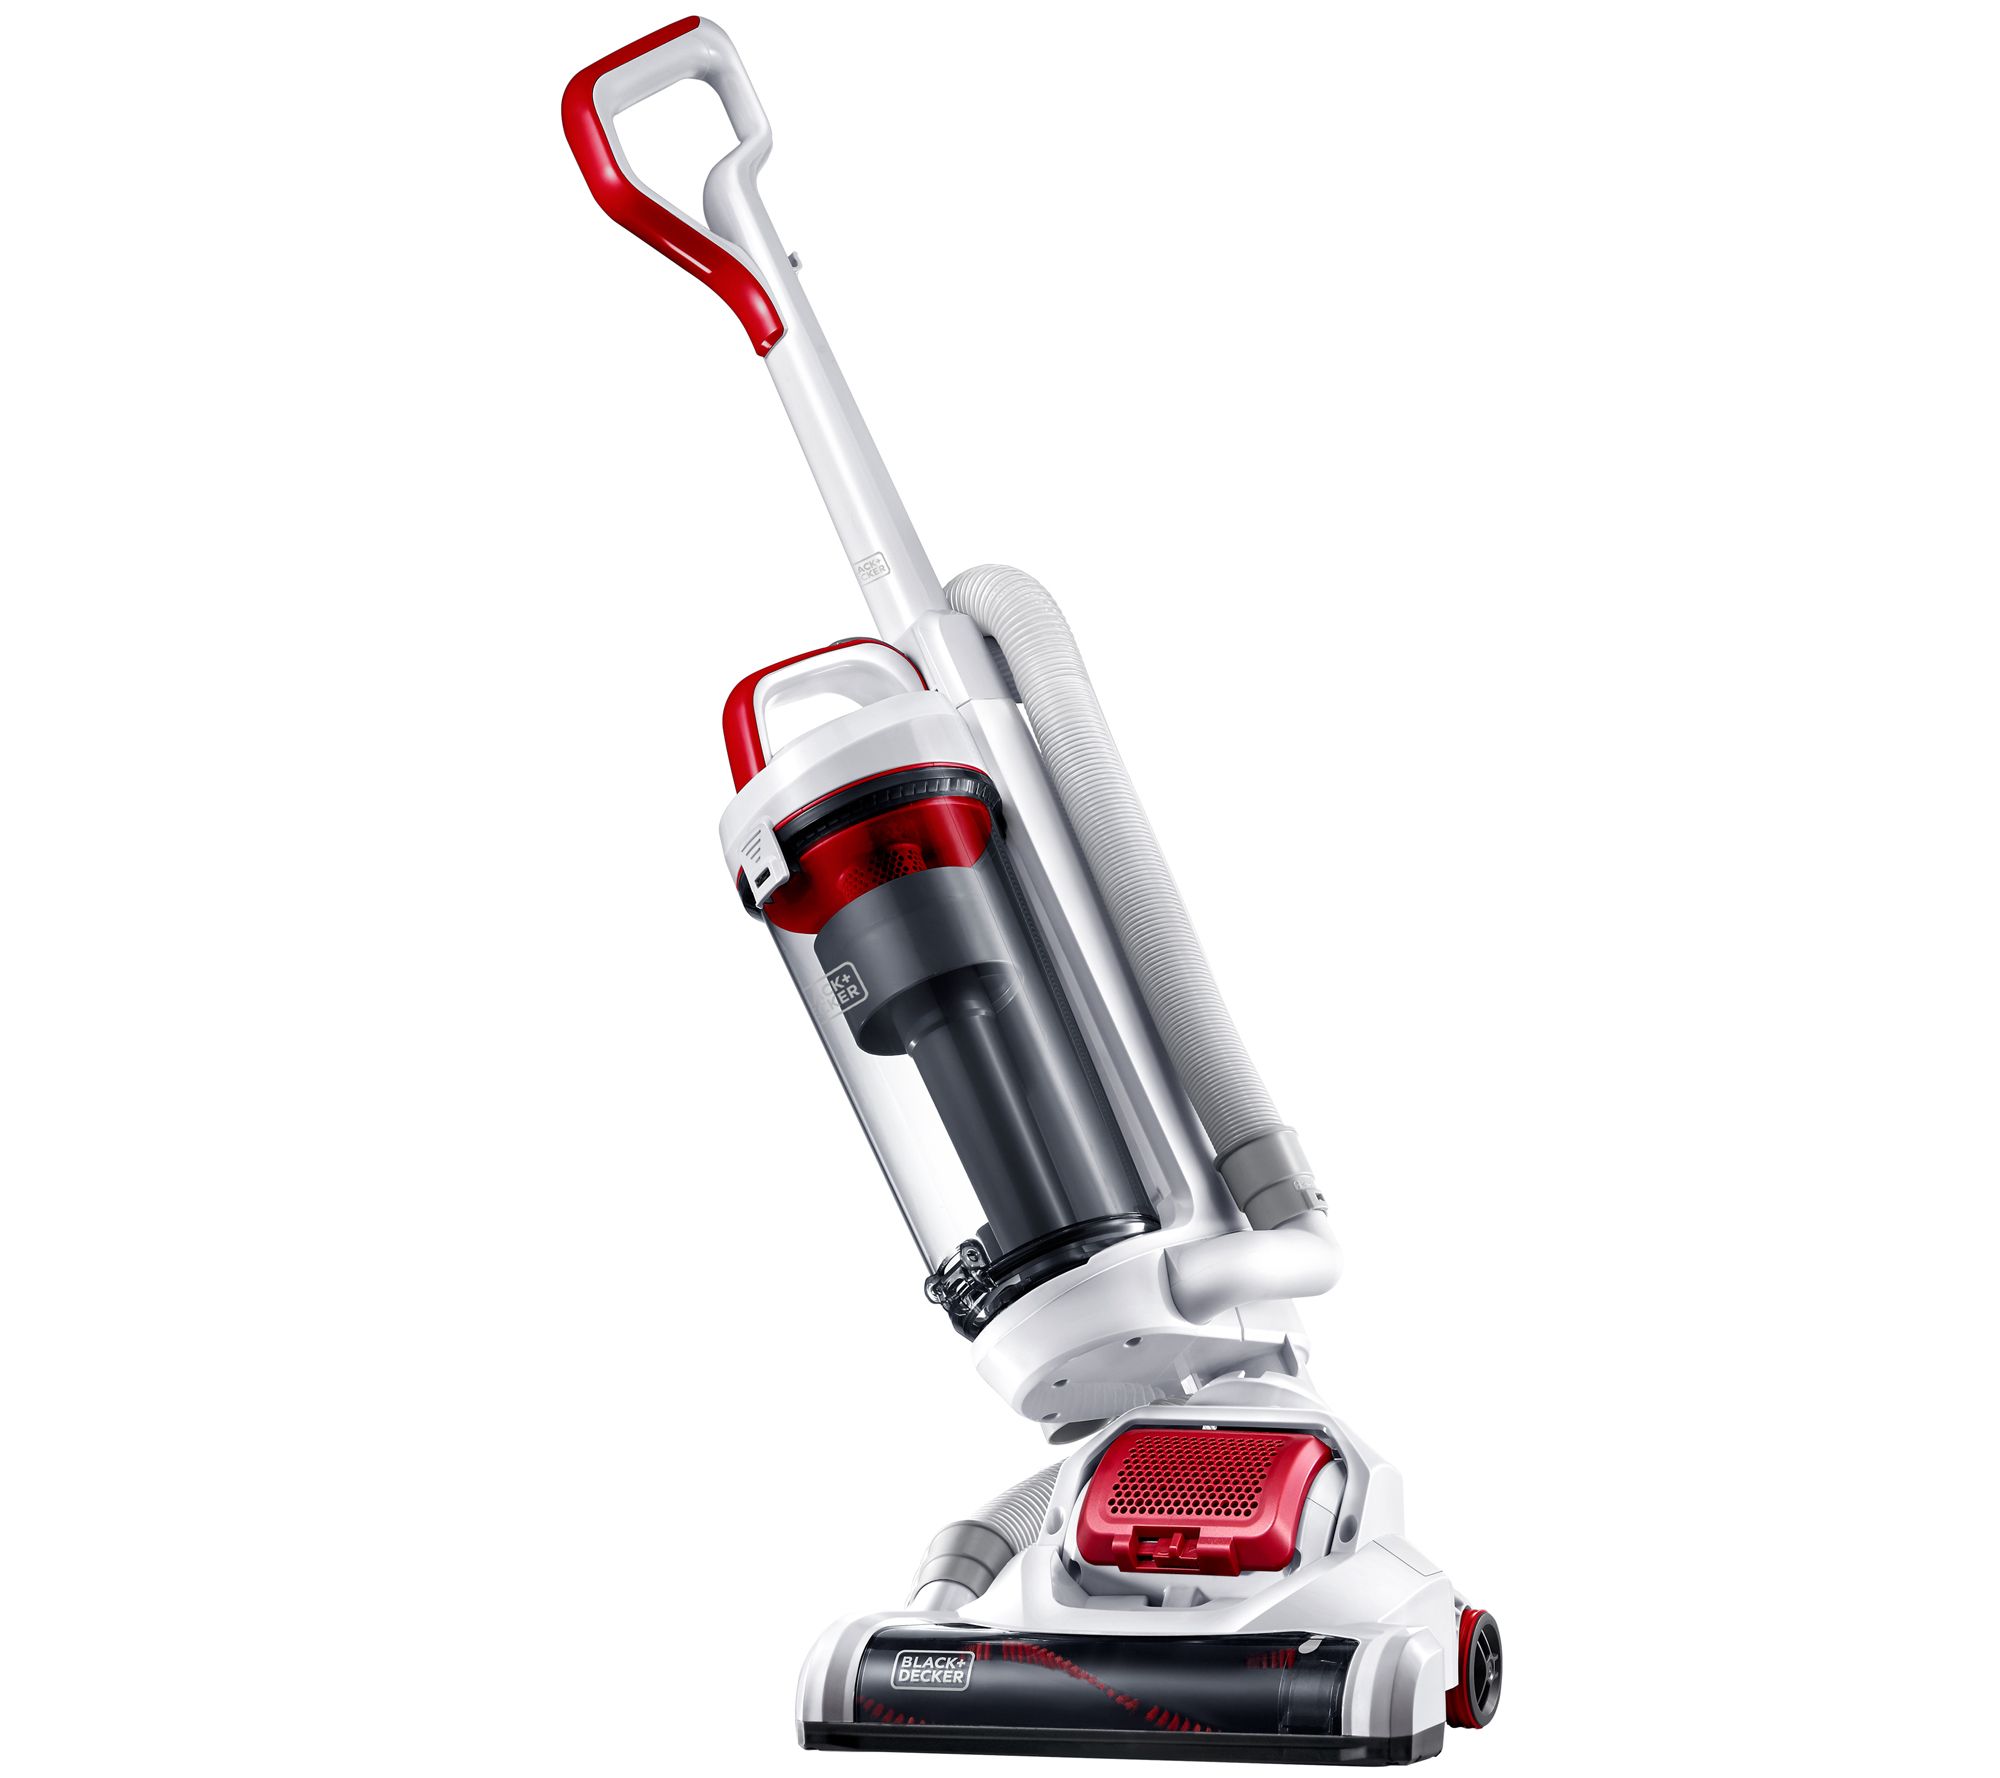 Black + Decker Airswivel Vacuum Only $49.99 Shipped on Target.com  (Regularly $100)